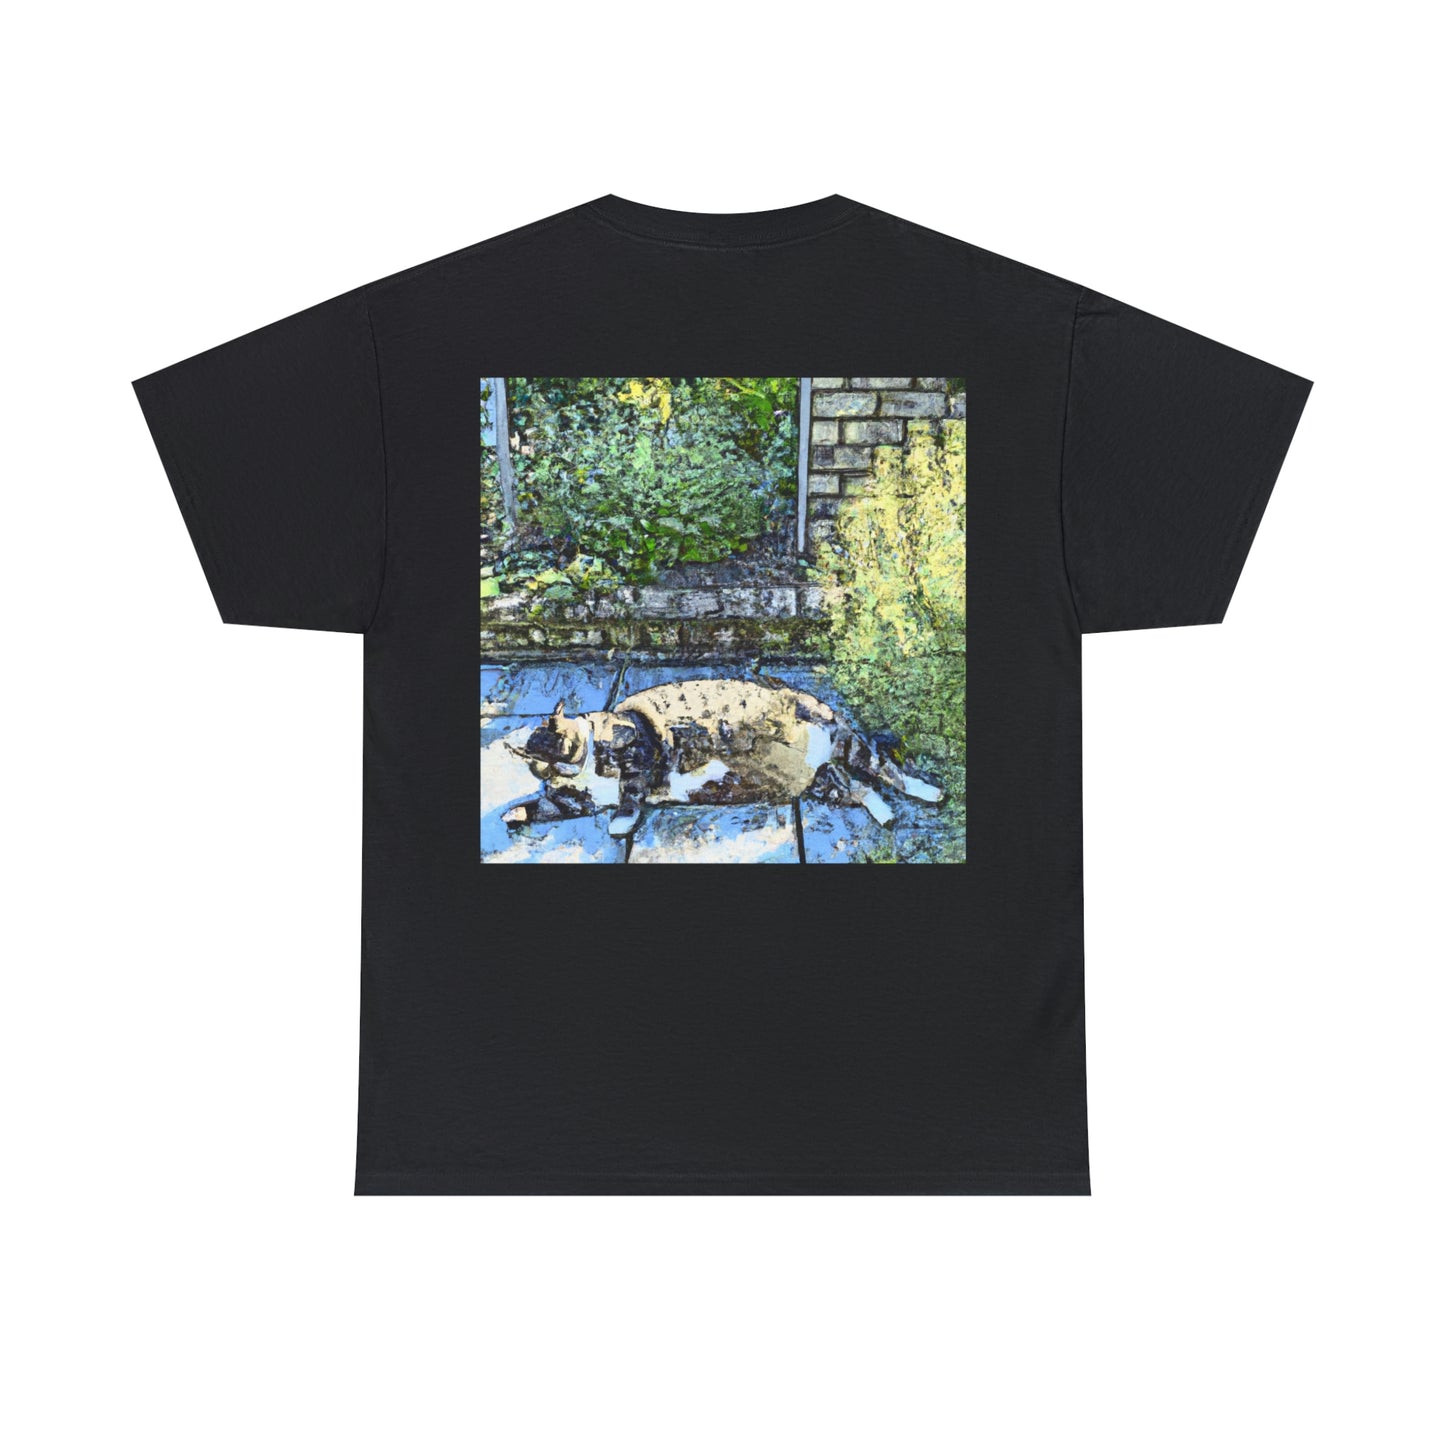 "A Cat's Life of Luxury" - The Alien T-shirt